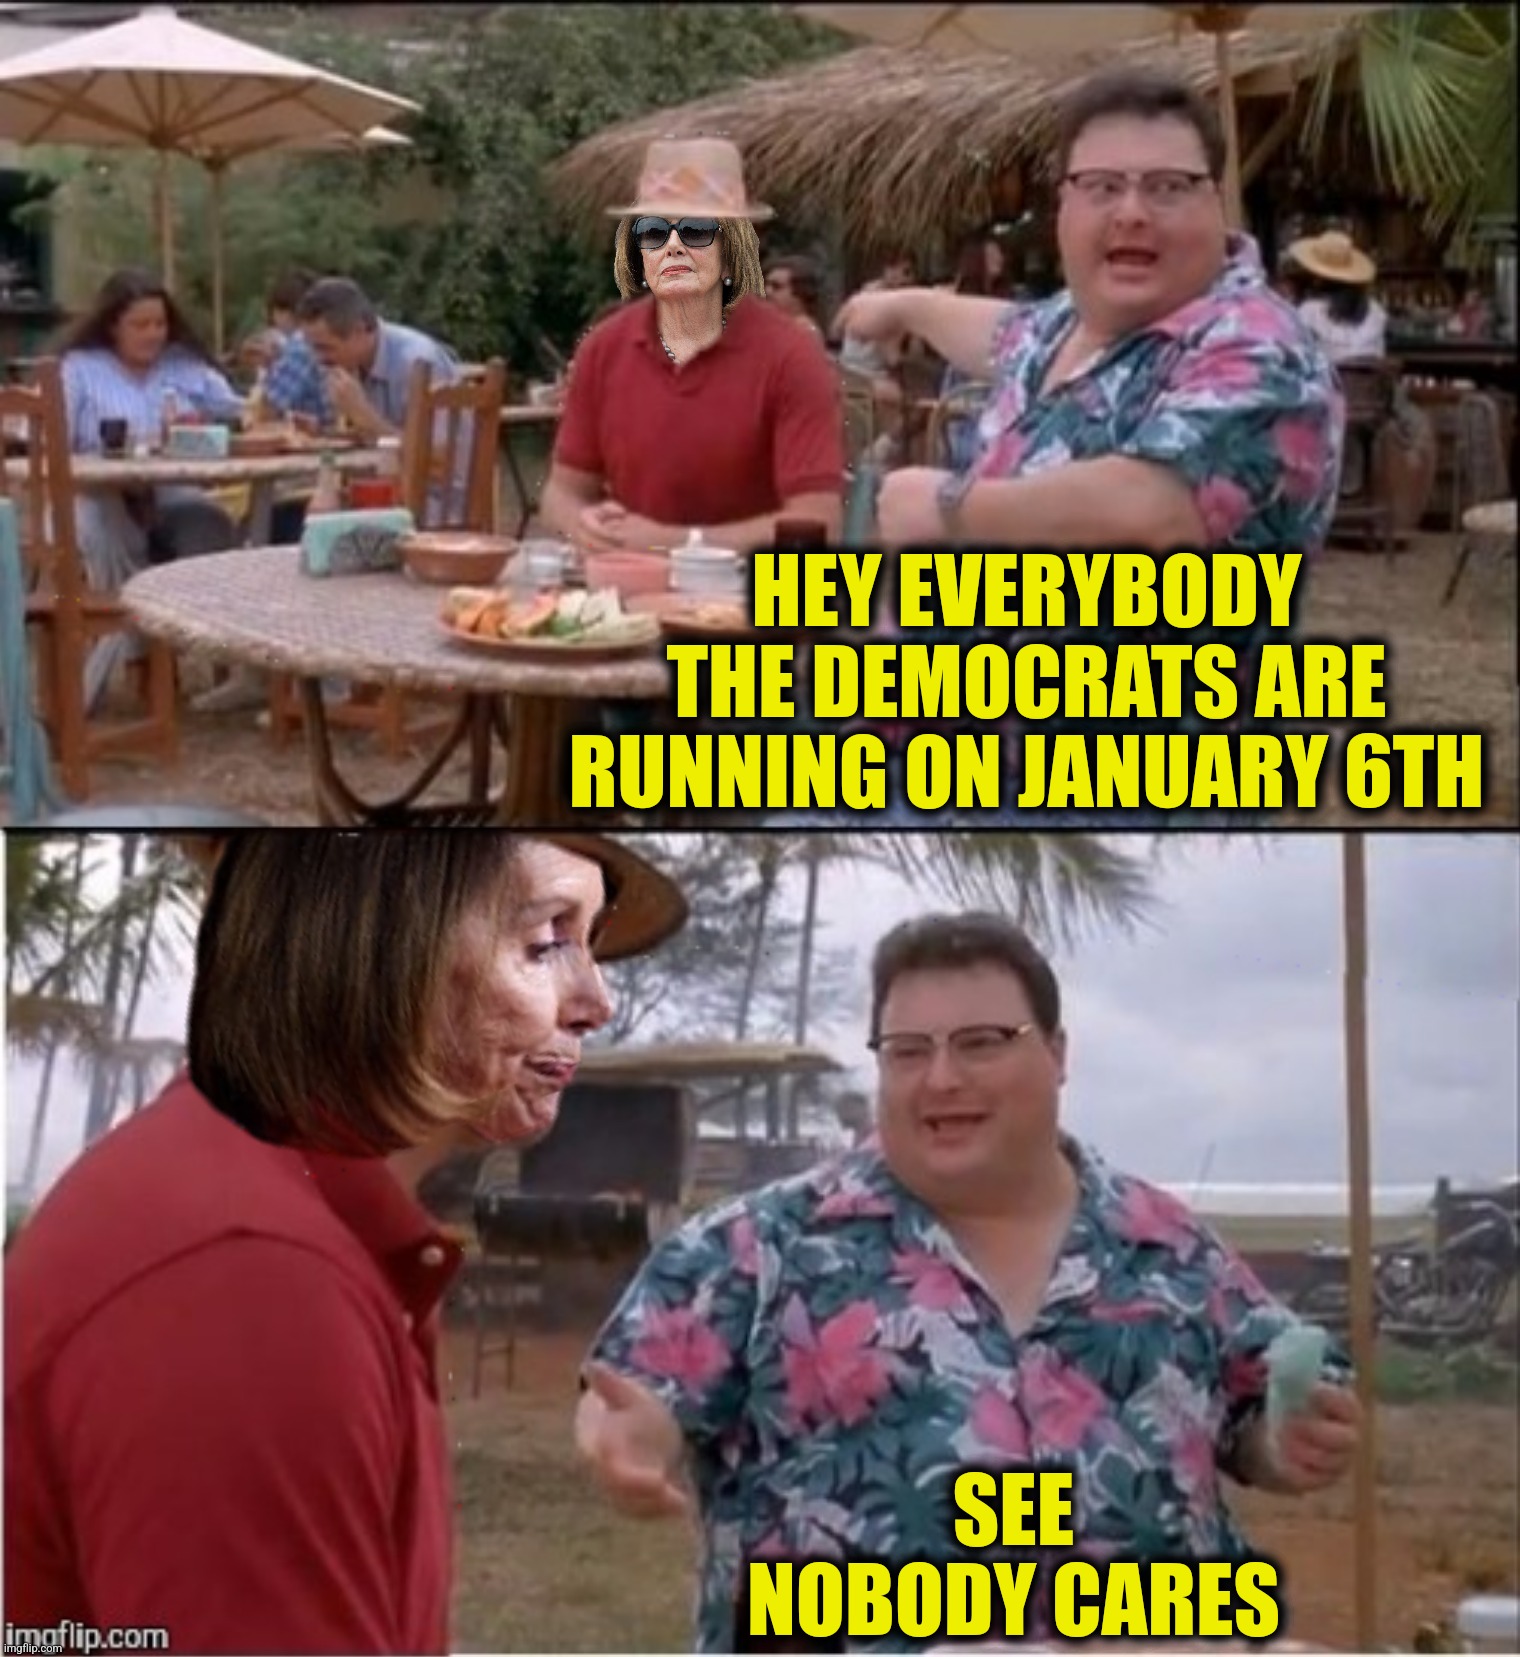 Running on empty | HEY EVERYBODY THE DEMOCRATS ARE RUNNING ON JANUARY 6TH; SEE NOBODY CARES | image tagged in bad photoshop,see nobody cares,nancy pelosi,democrats,januaury 6th | made w/ Imgflip meme maker